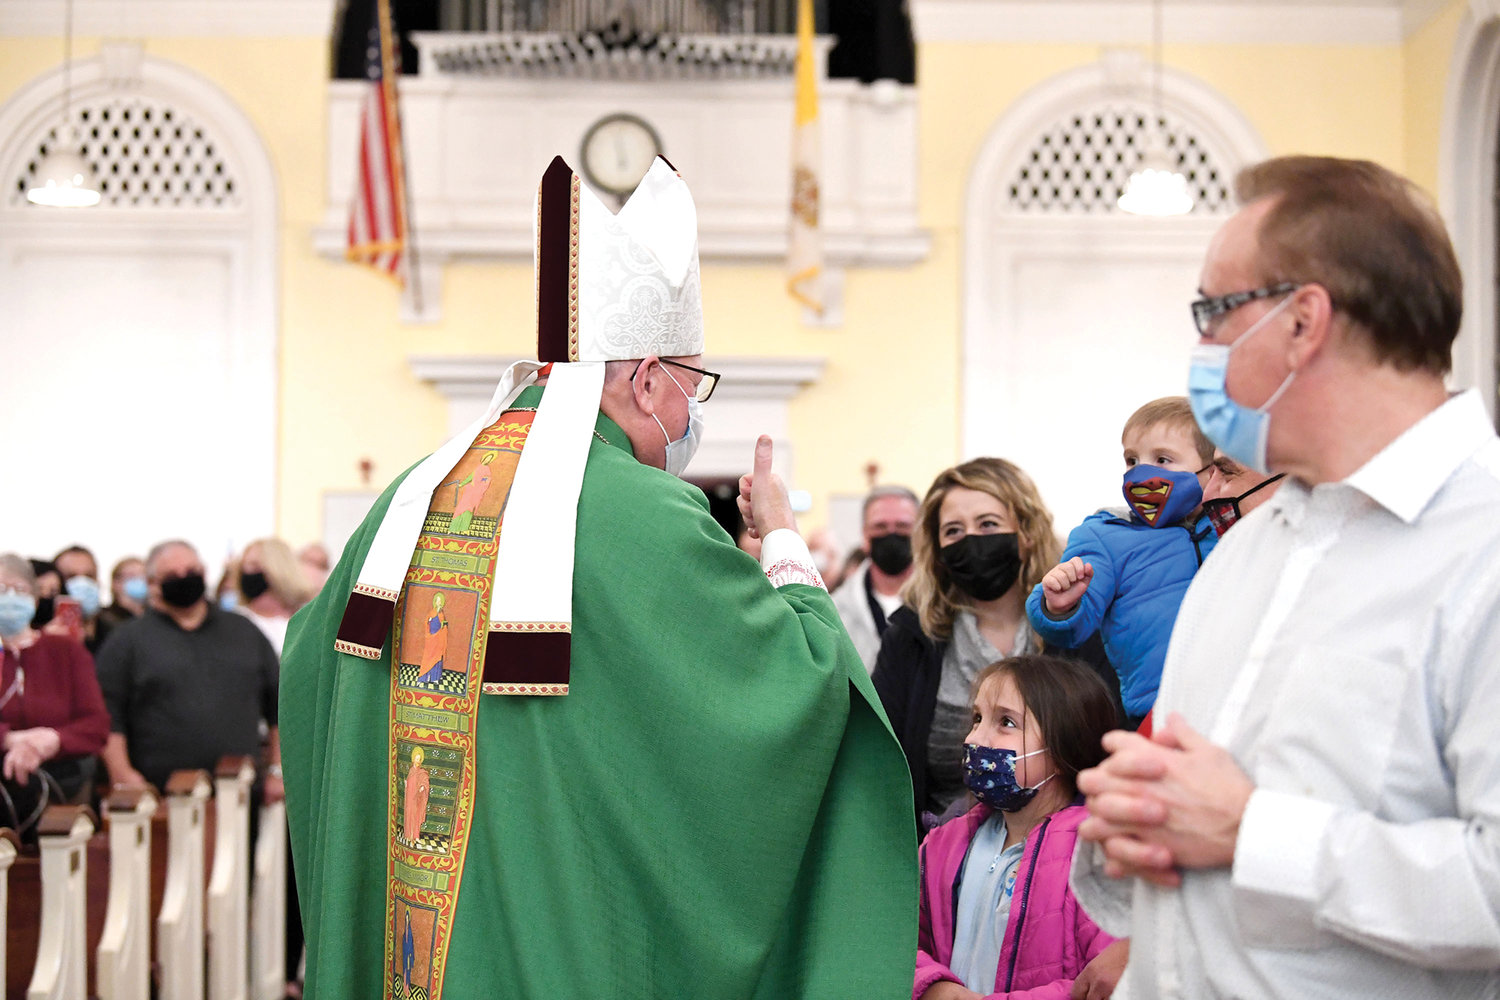 Cardinal Dolan greets people at the end of the Mass.